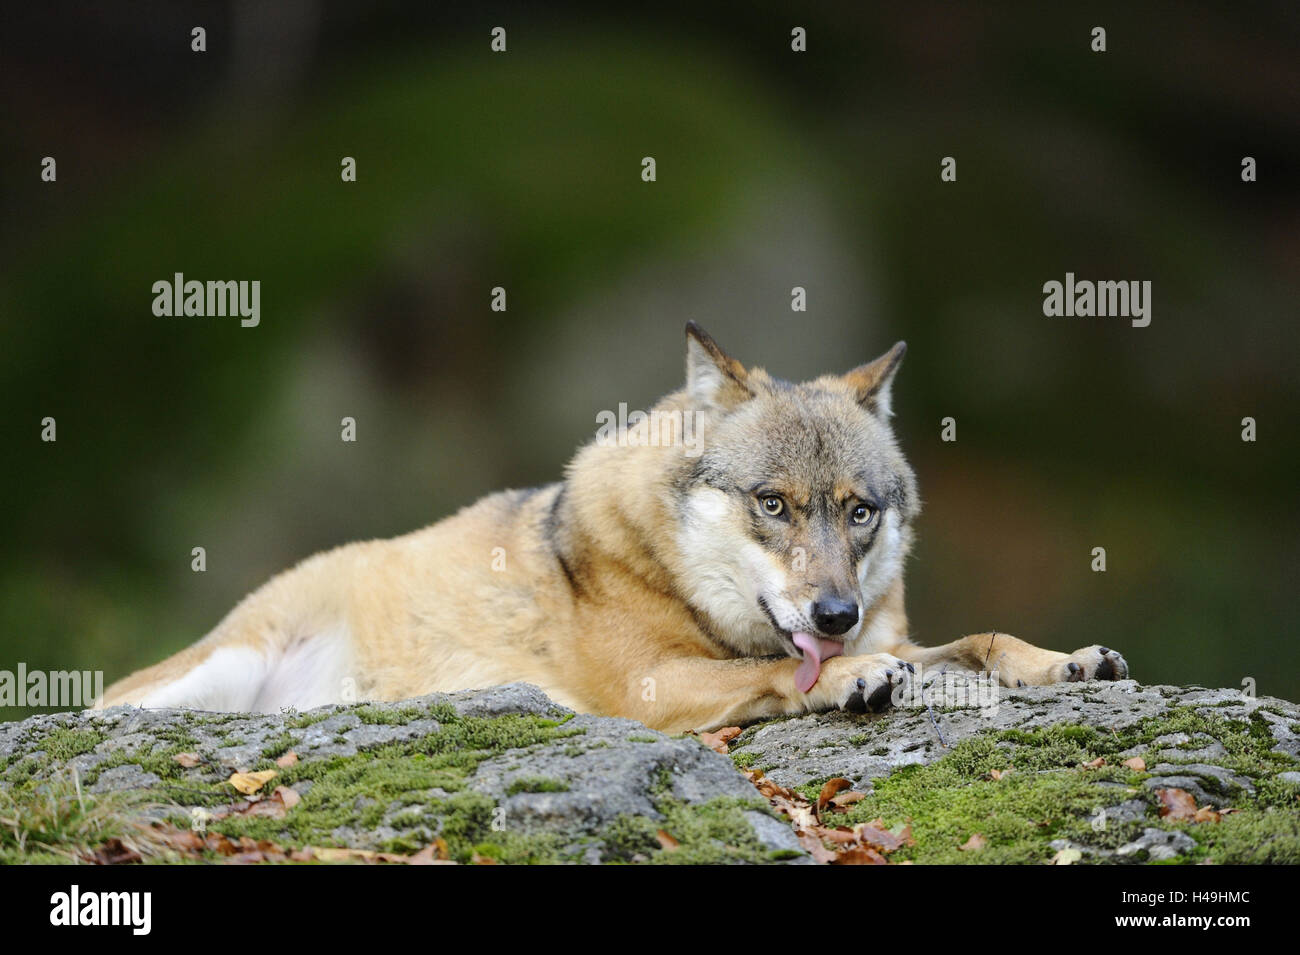 Loup eurasien, Canis lupus lupus, rock, mensonge, looking at camera, Banque D'Images